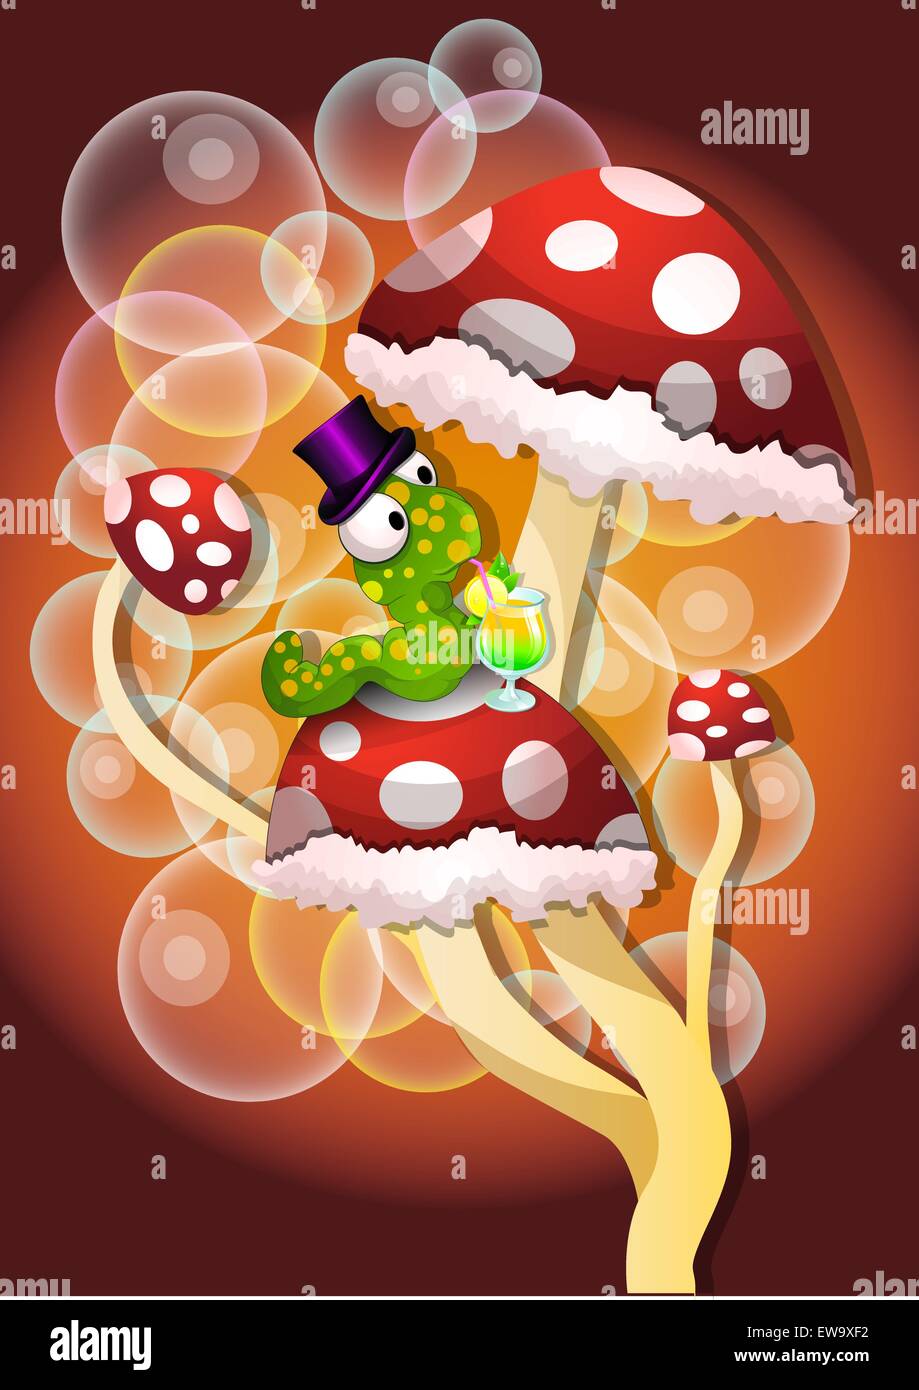 Mushrooms, Spotted, Red, Green Worm, Bubbles, Cocktail Drink, vector illustration Stock Vector